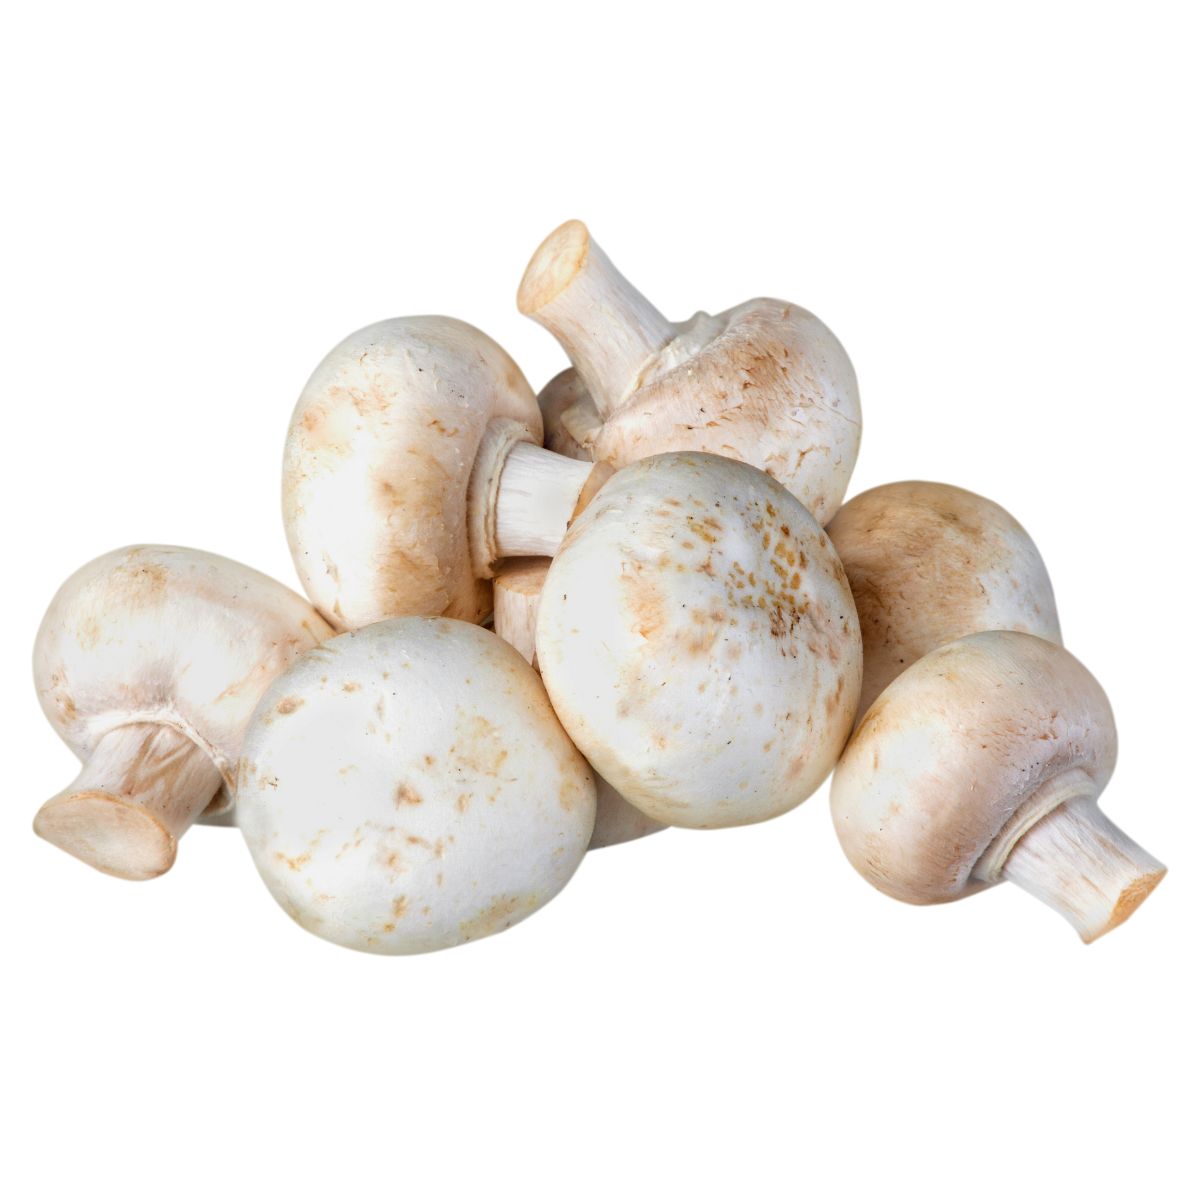 A pile of Mushroom Pre-Packed - 310g isolated on a white background.